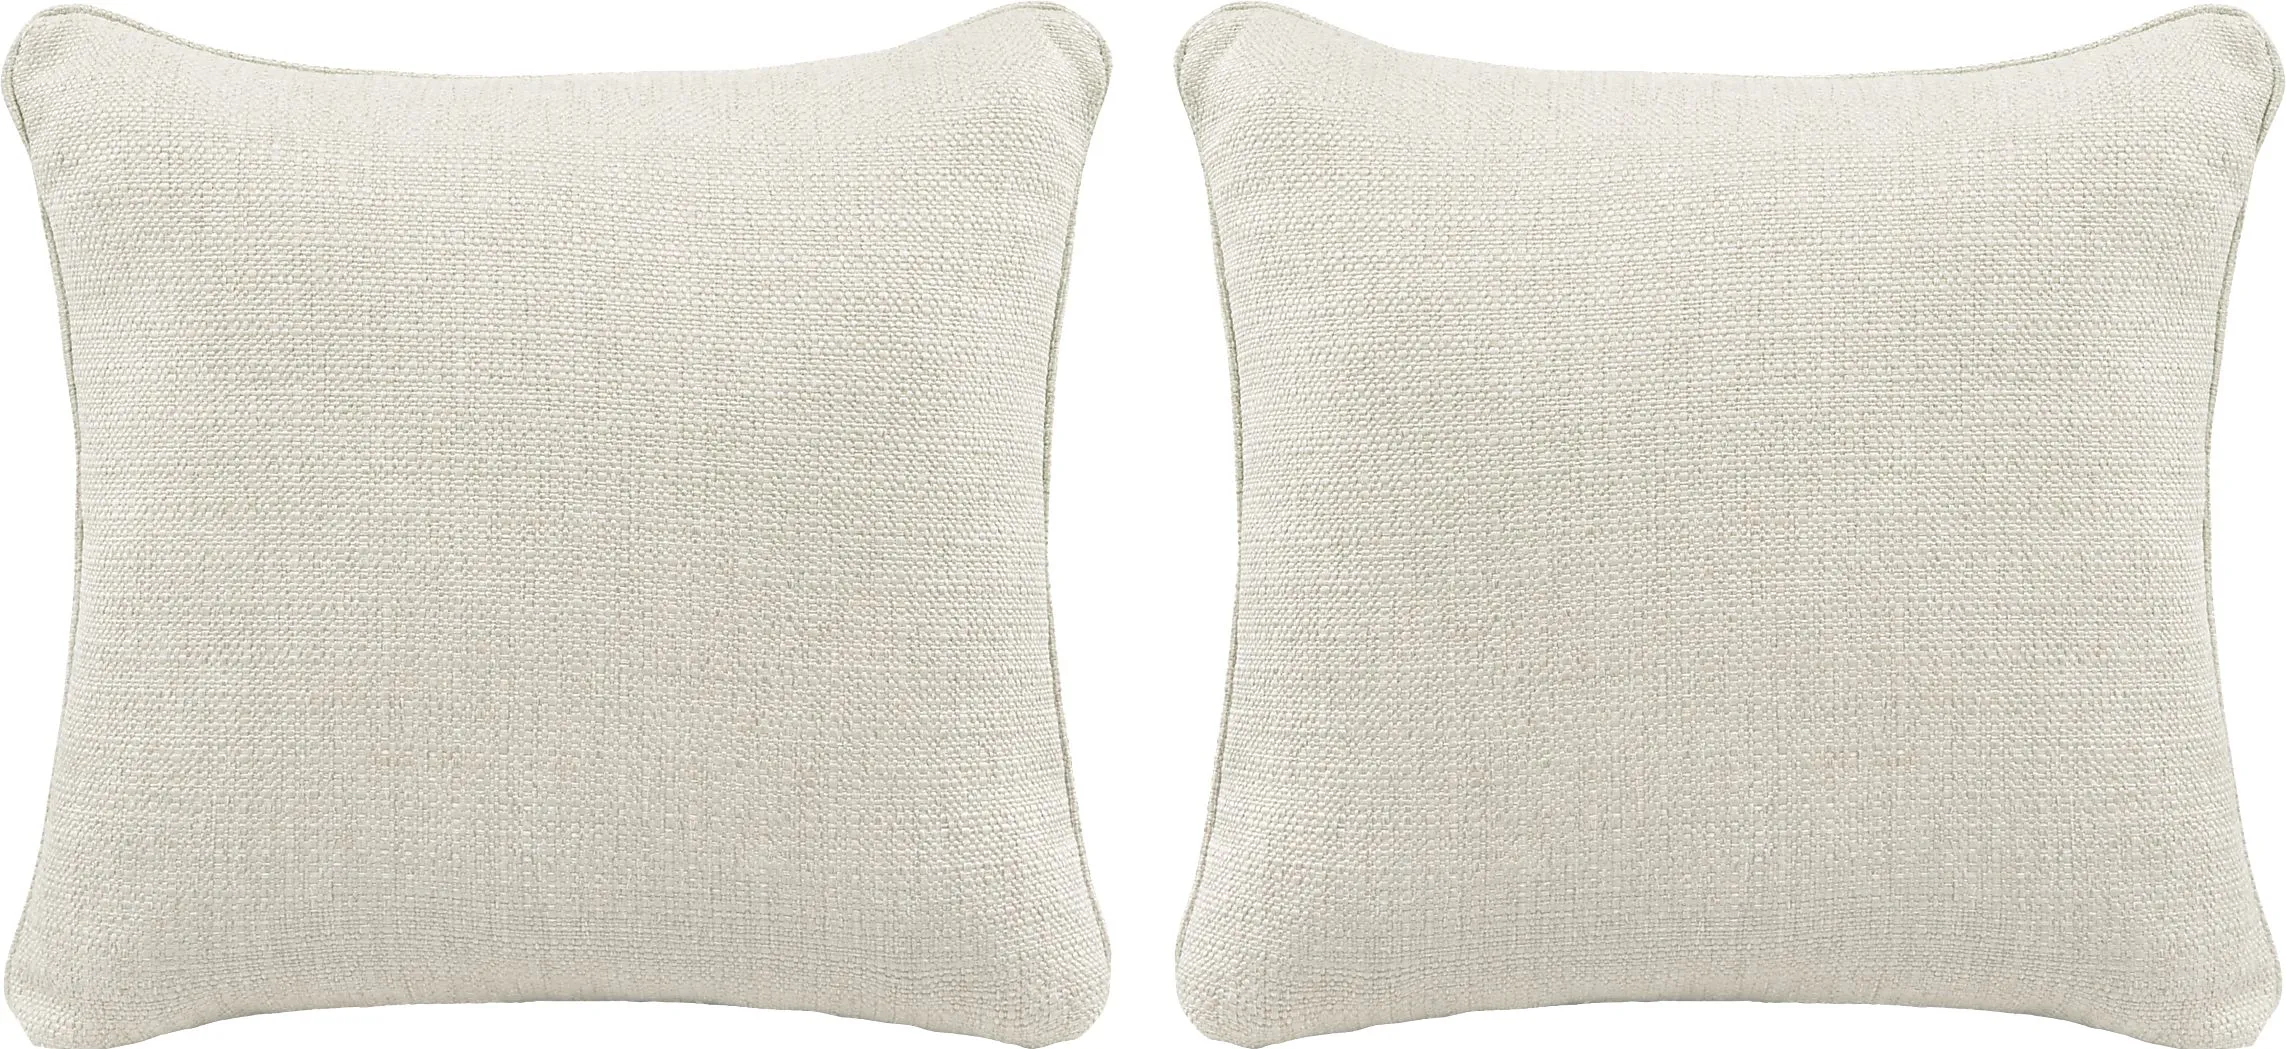 Sugar Shack Off-White Accent Pillow, Set of Two